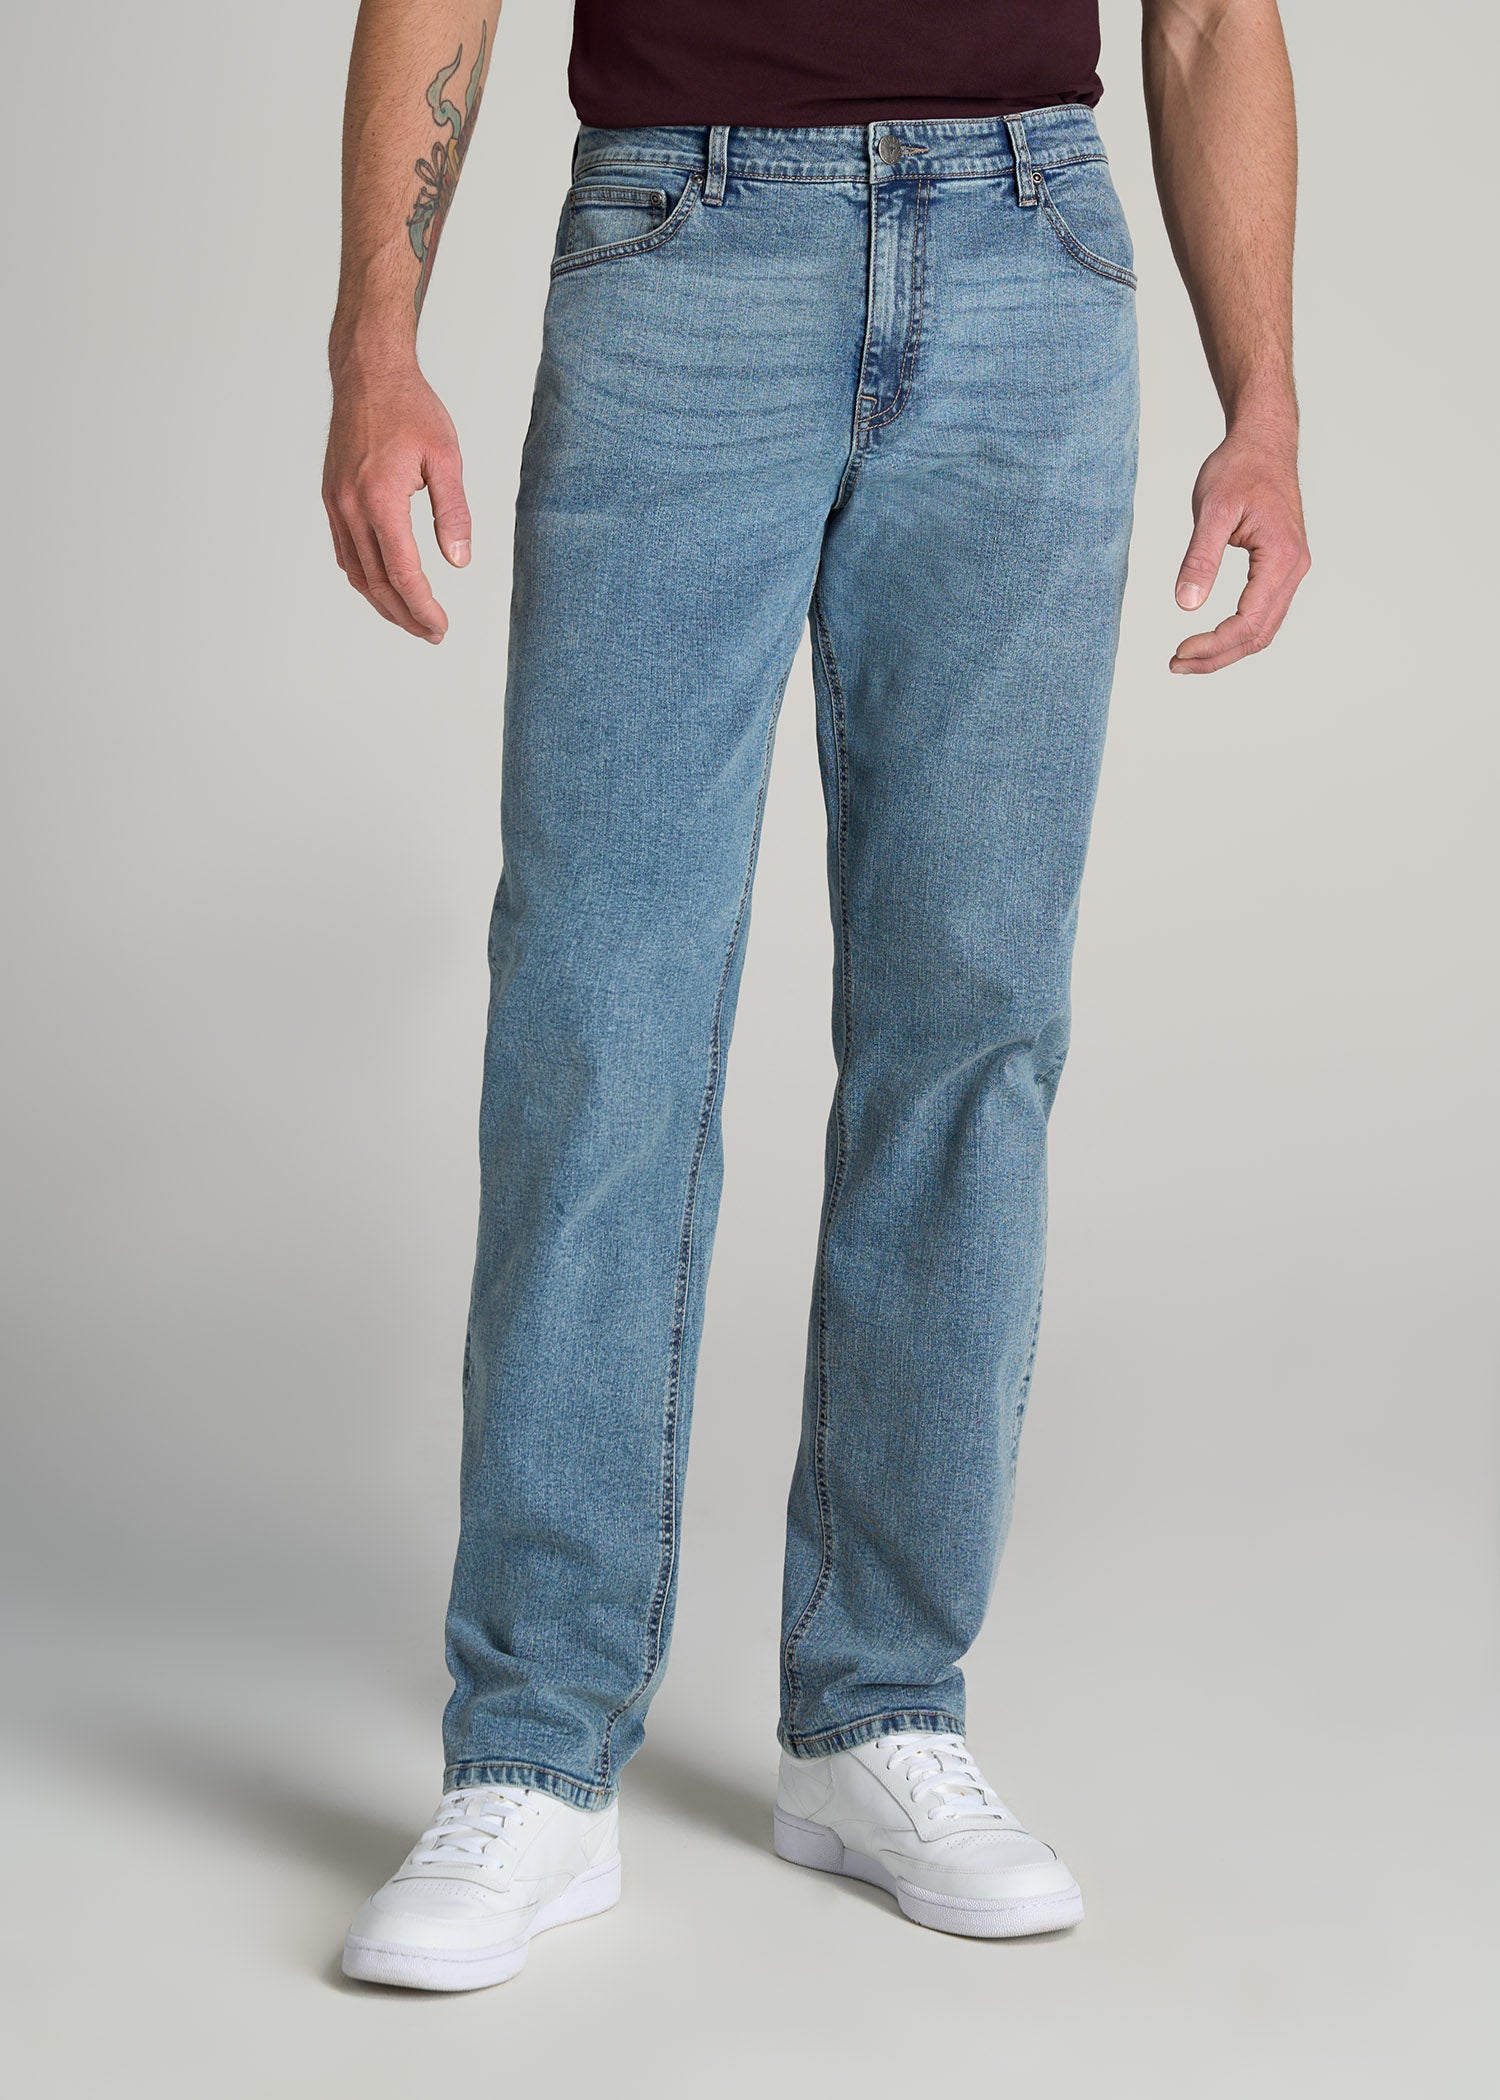 Mason SEMI-RELAXED Jeans for Tall Men in Vintage Faded Blue